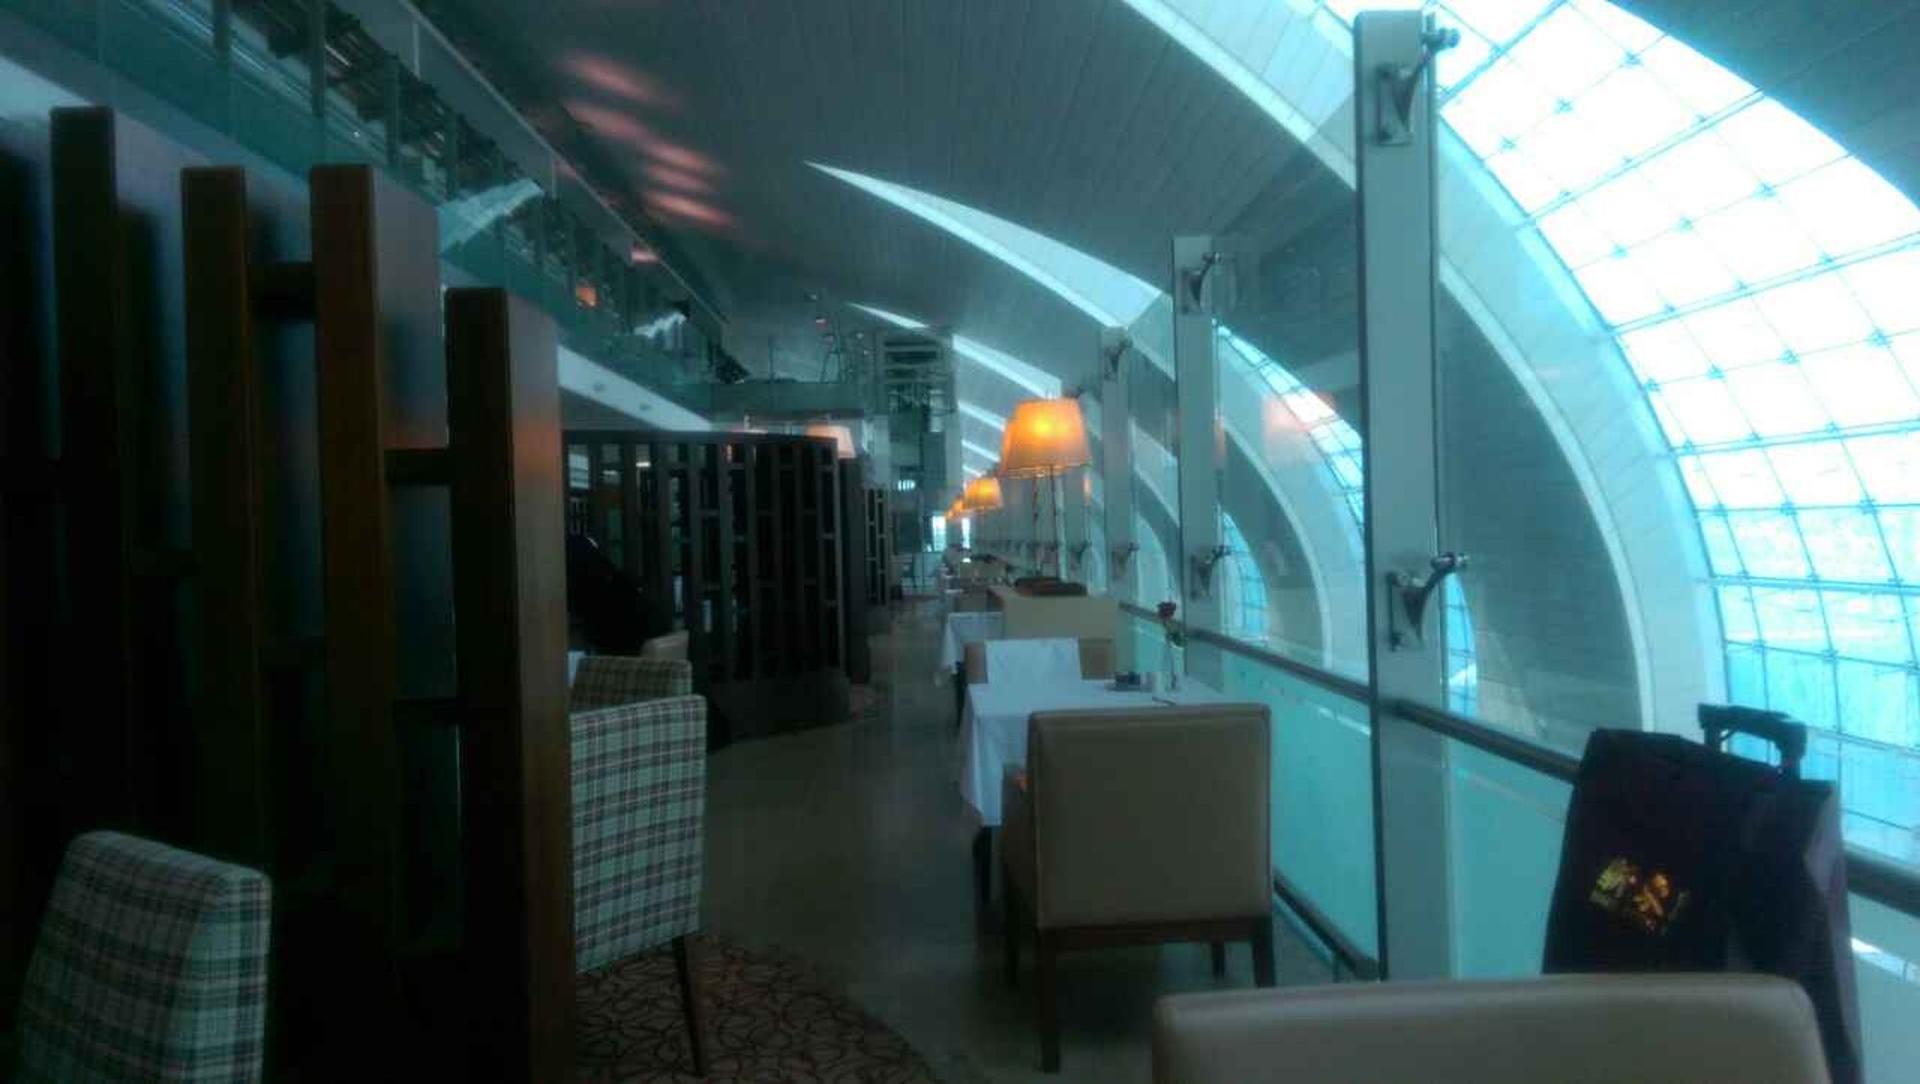 Emirates First Class Lounge image 12 of 21